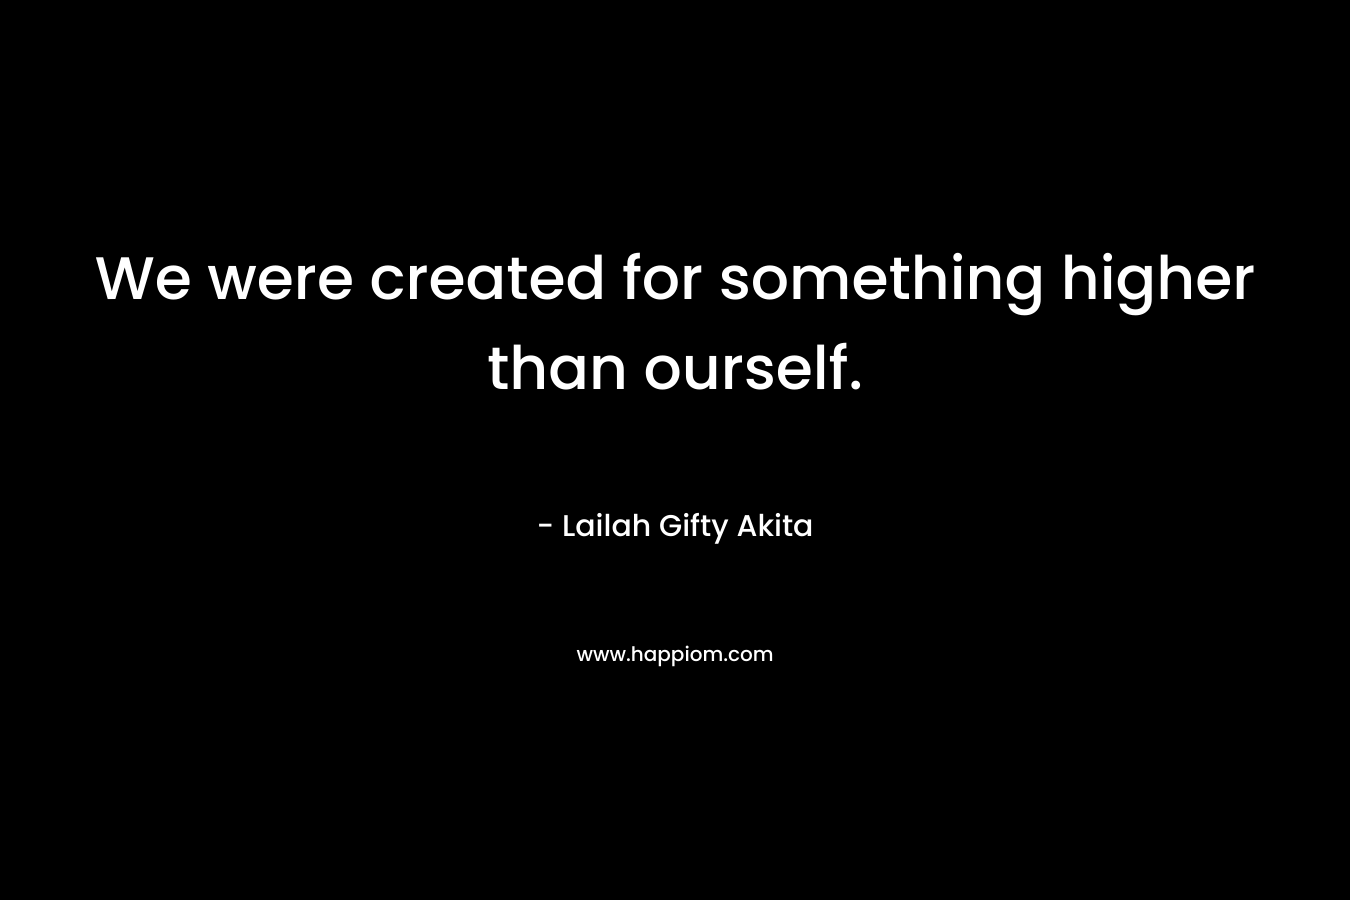 We were created for something higher than ourself.